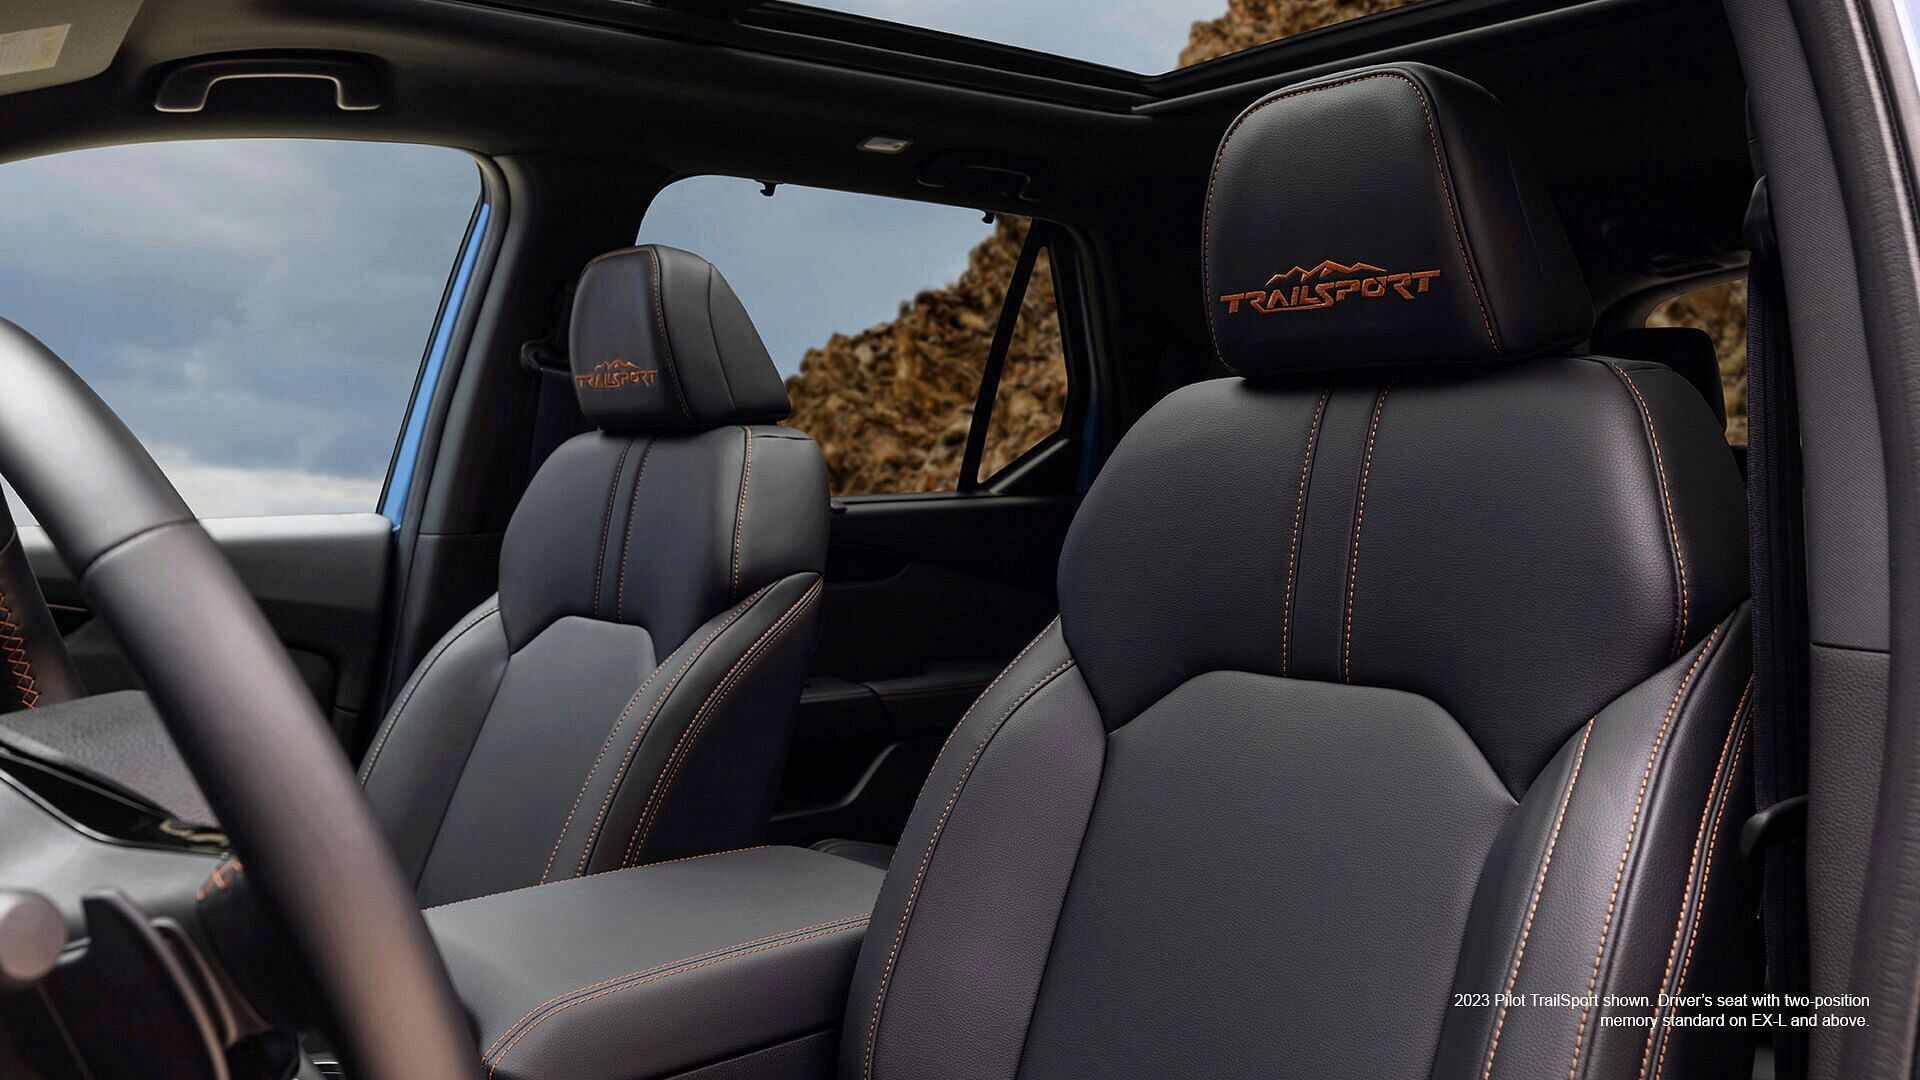 2023 Honda Pilot TrailSport shown. Driver's leather seat with two-position memory standard on EX-L and above.